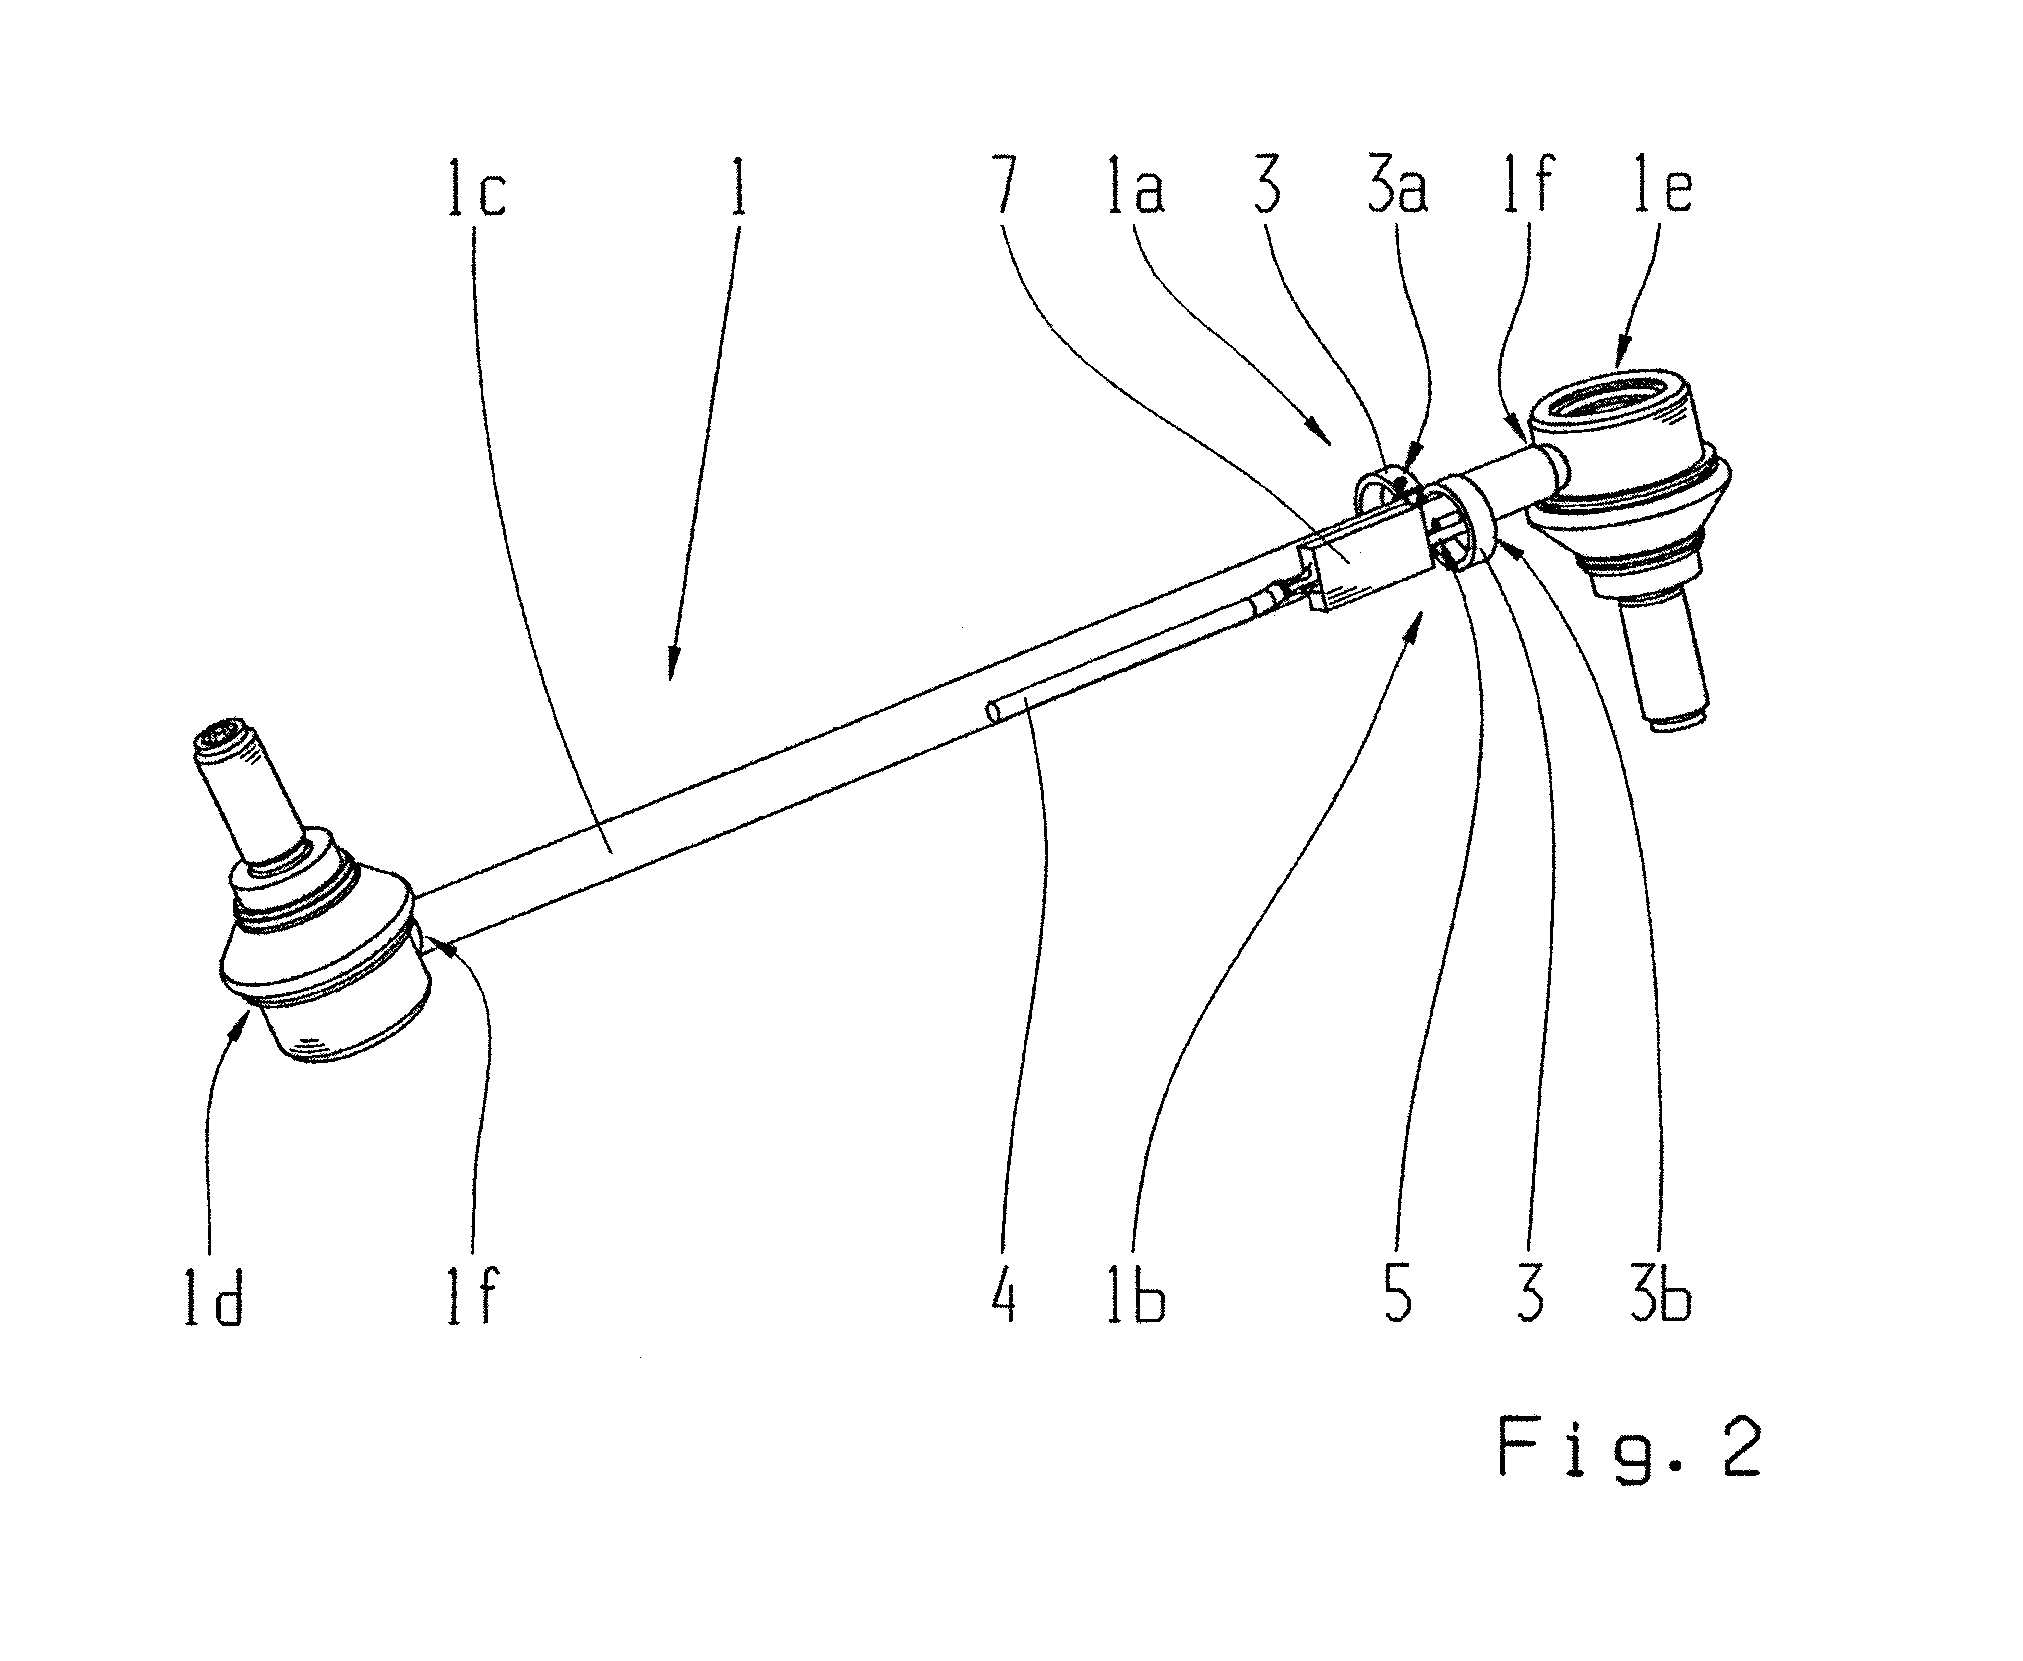 Device having a measuring apparatus for measuring forces and/or loads